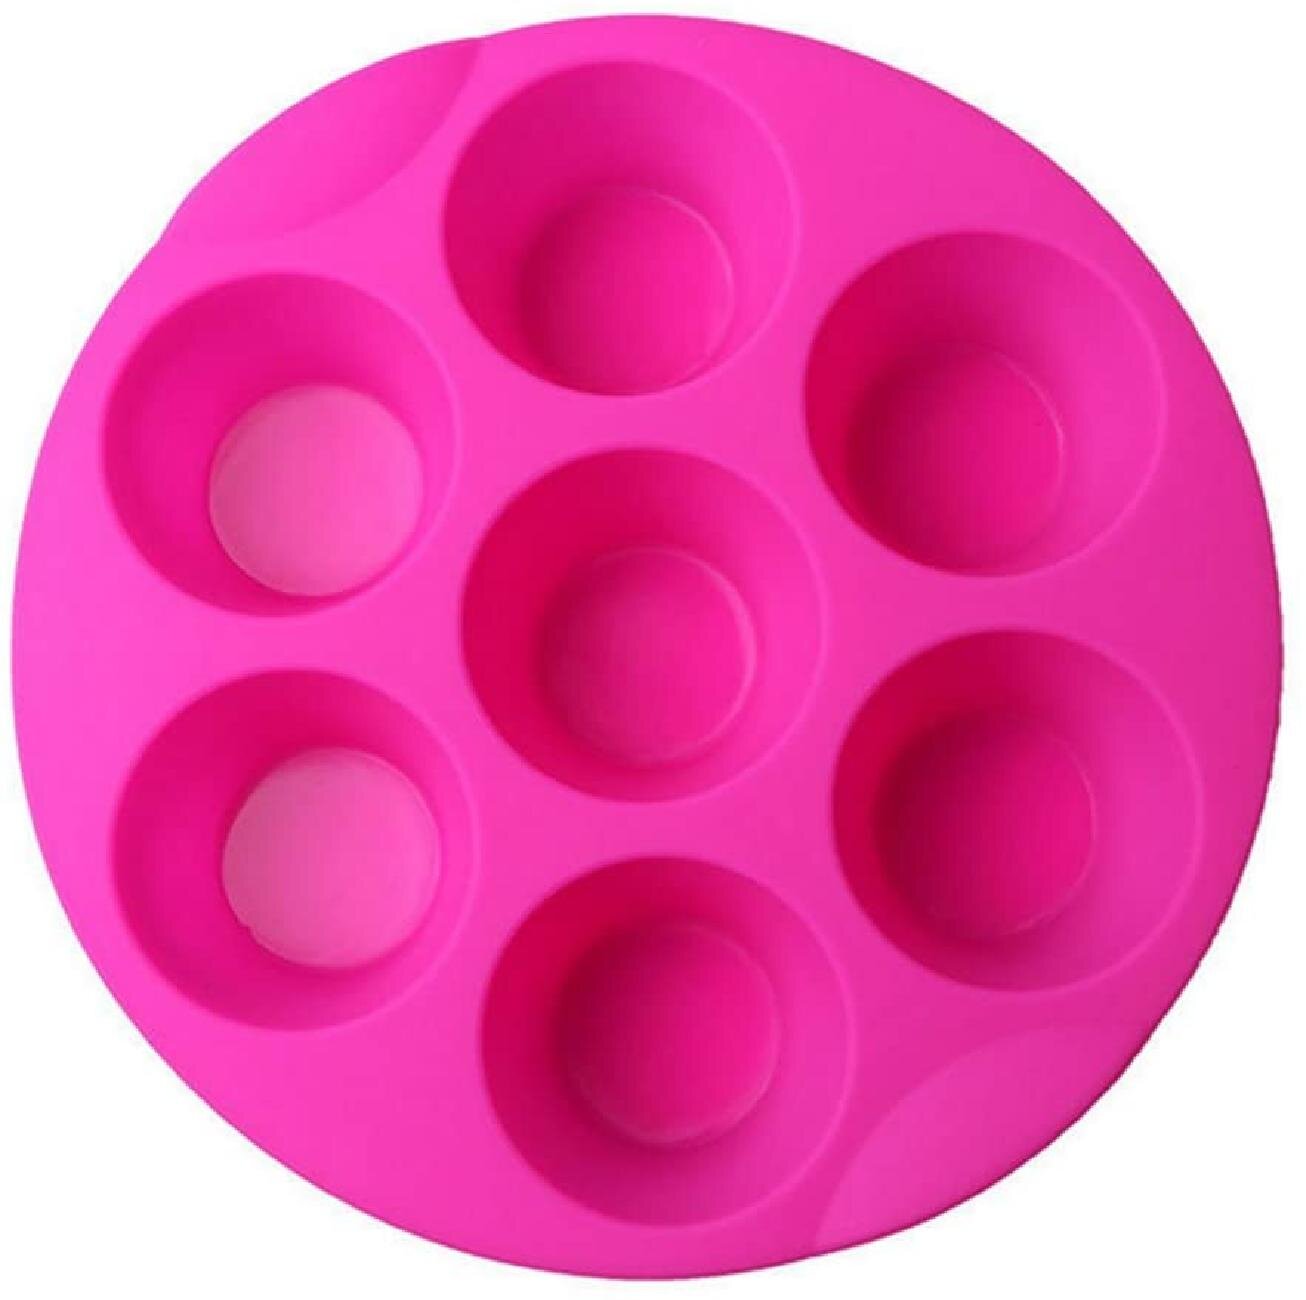 12SILICONE LARGE MUFFIN PUDDING MOULD BAKEWARE CUP CAKE BAKING TRAY Random color